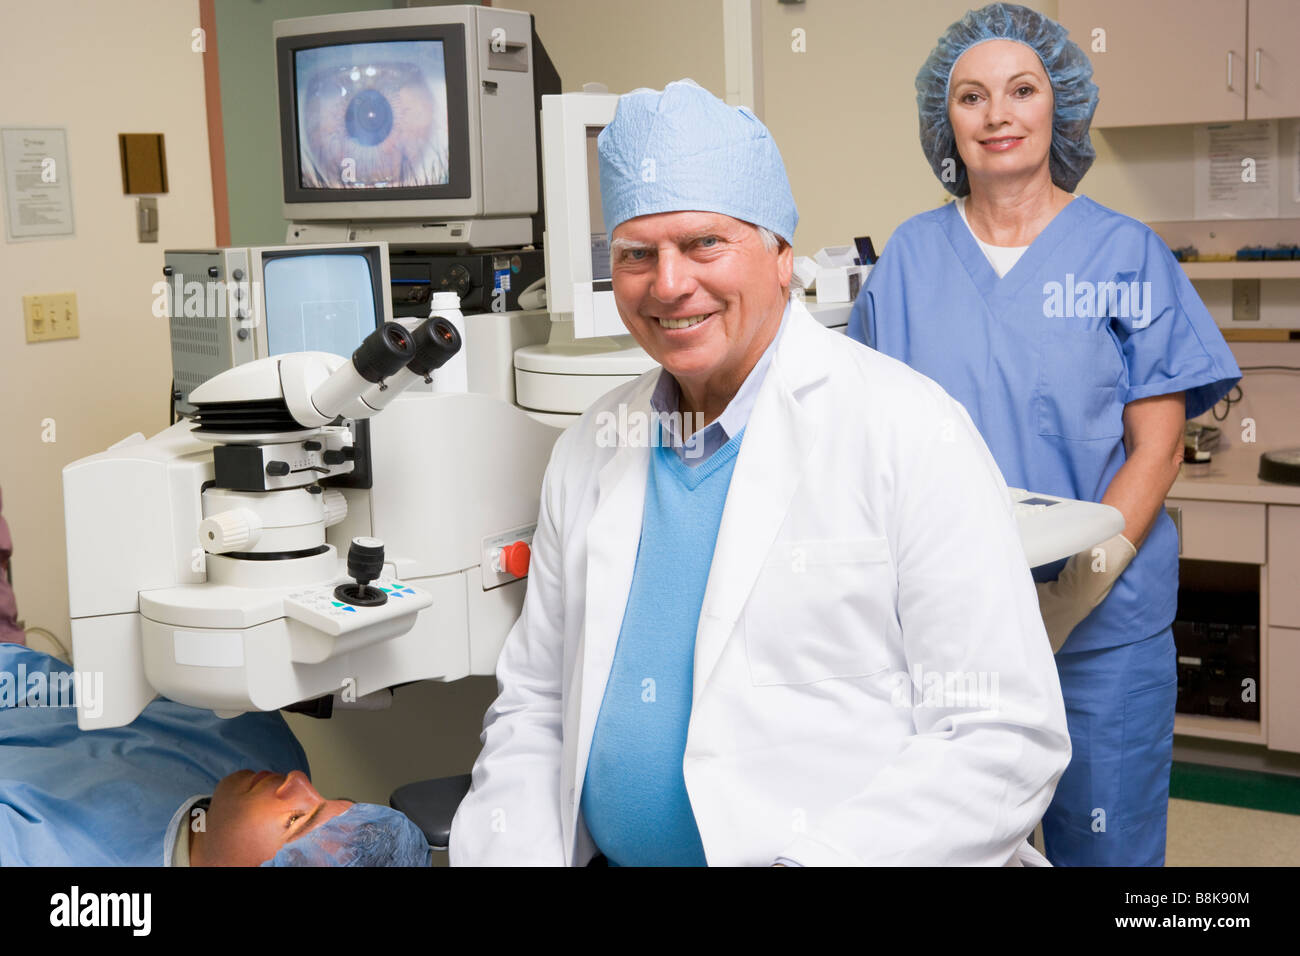 Doctor, Nurse And Patient About To Undergo Eye Exam Stock Photo